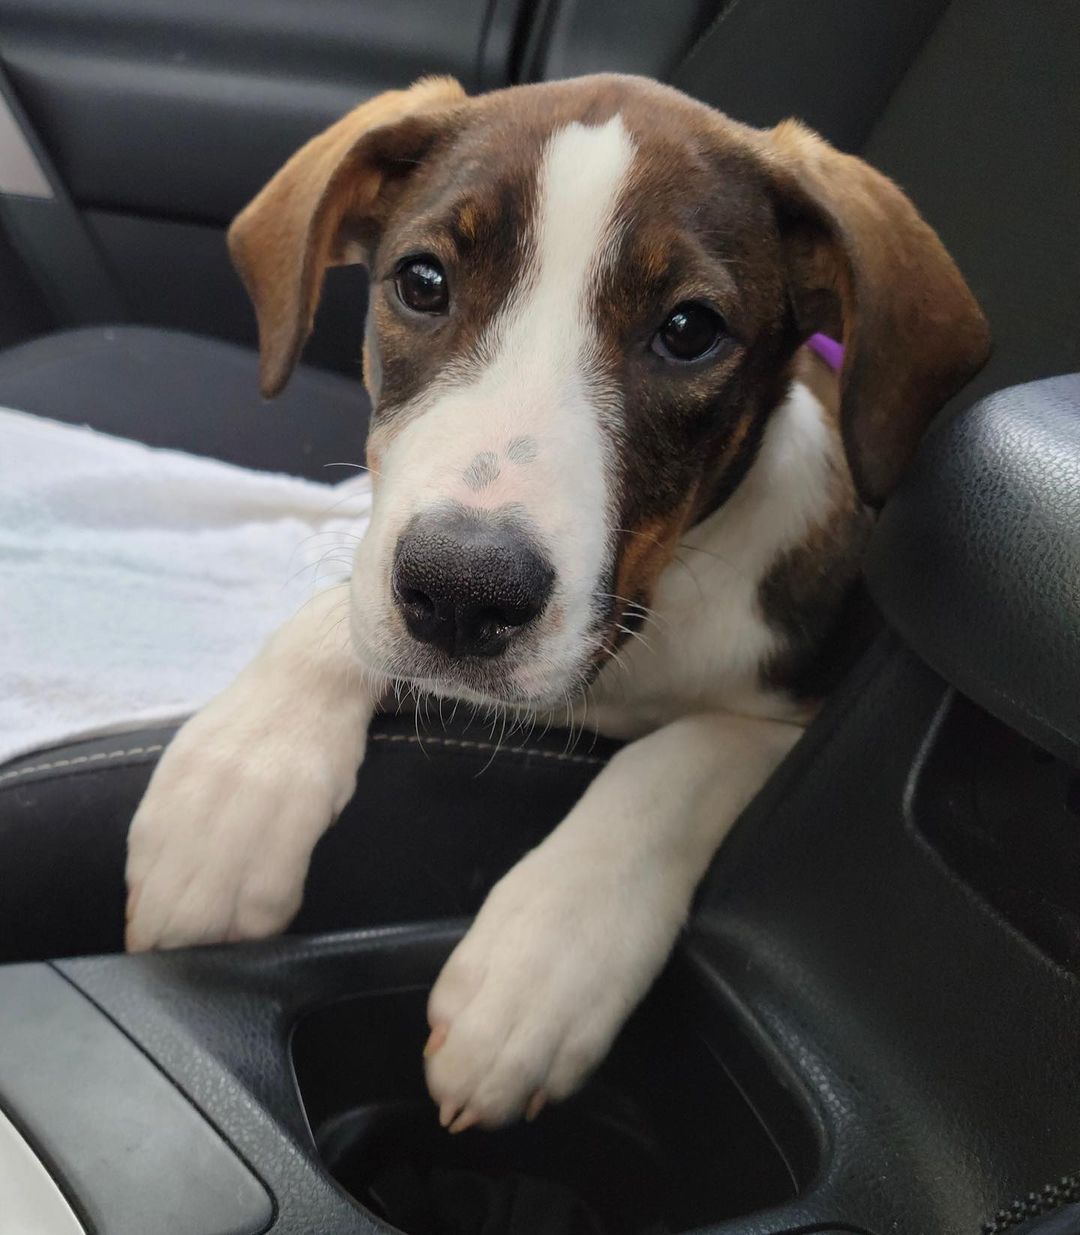 Meet Rosemary!
🐾Female
🐾Age: DOB: 7/31/2021
🐾Weight: 20 lbs and growing!
🐾Breed: Beagle/Shepherd/Lab mix
🧡
Hey there, I’m Rosemary! I am the sweet and docile one of my litter! I enjoy playing with the occasional tennis ball or chewing on a bone and spending time with my human; even more so if we are cuddling! I get nervous with fast moving things and shy away quickly. I also like to talk for a little bit during my crate time and would hate to disrupt nearby neighbors, so unfortunately, I would not do well in apartments or a home with shared walls.
🍁
I can be shy when I first meet other dogs, but I do warm up after some time and really enjoy interacting with my furry friends! Since I am young, I am still learning all the basic manners such as house training, crate training and leash training. I am catching on quickly to all of them but will need continued work to ensure I am a pro in no time!
☀️
If you are interested in meeting Rosemary, apply to adopt her at www.causeforcanines.org
Must have a flexible schedule to accommodate a puppy’s needs.
Adoption fee: $350
Must be an Ohio resident & 23 or older.
Children must be 10 or older.
Cats unknown.
No Apartments.